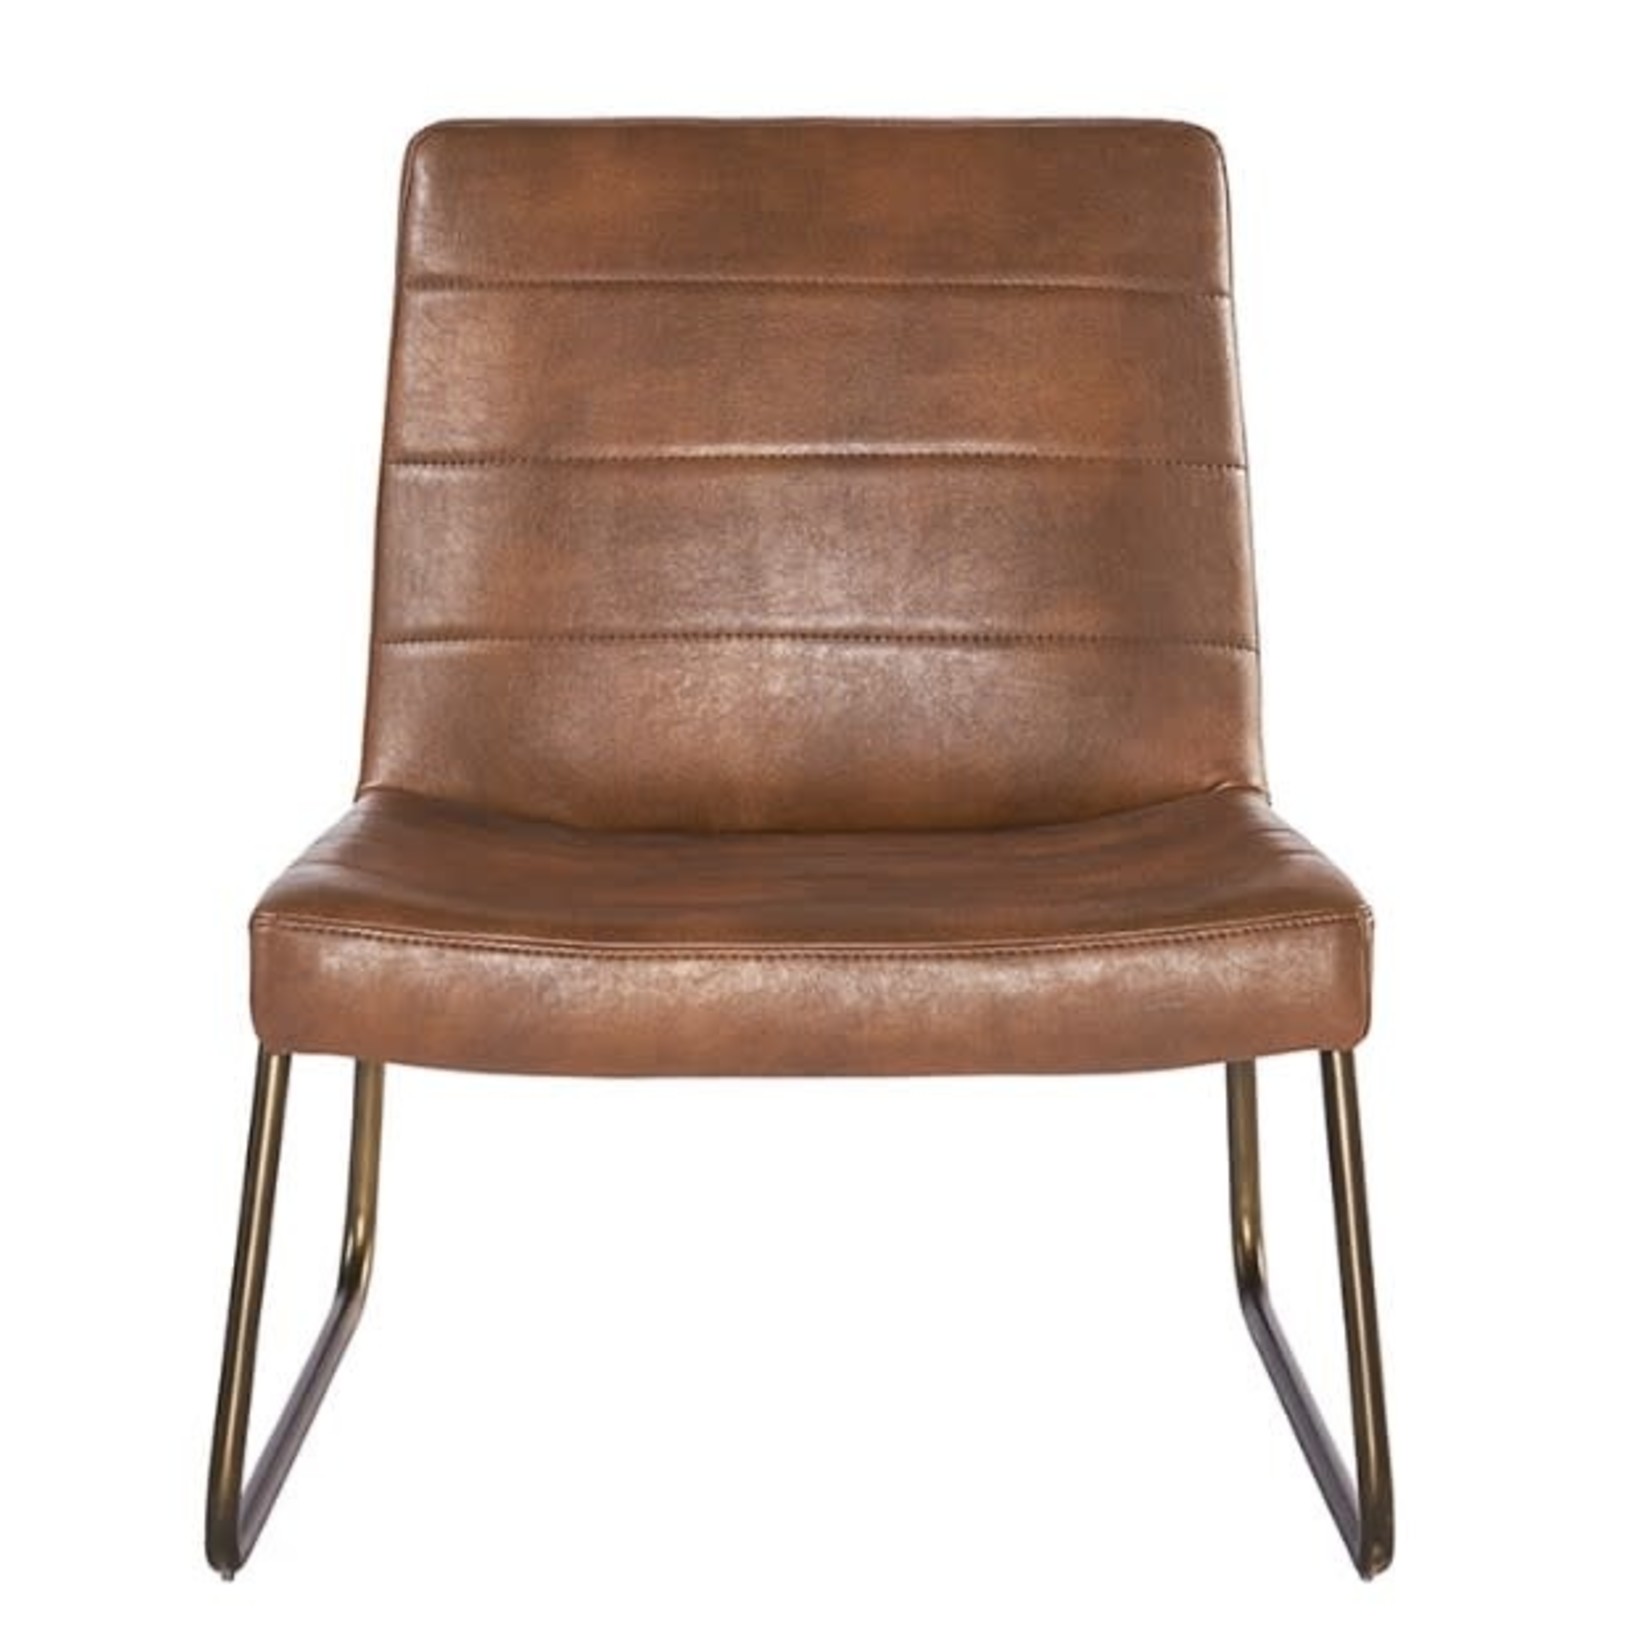 Mickler & Co. Anthony Lounge Chair